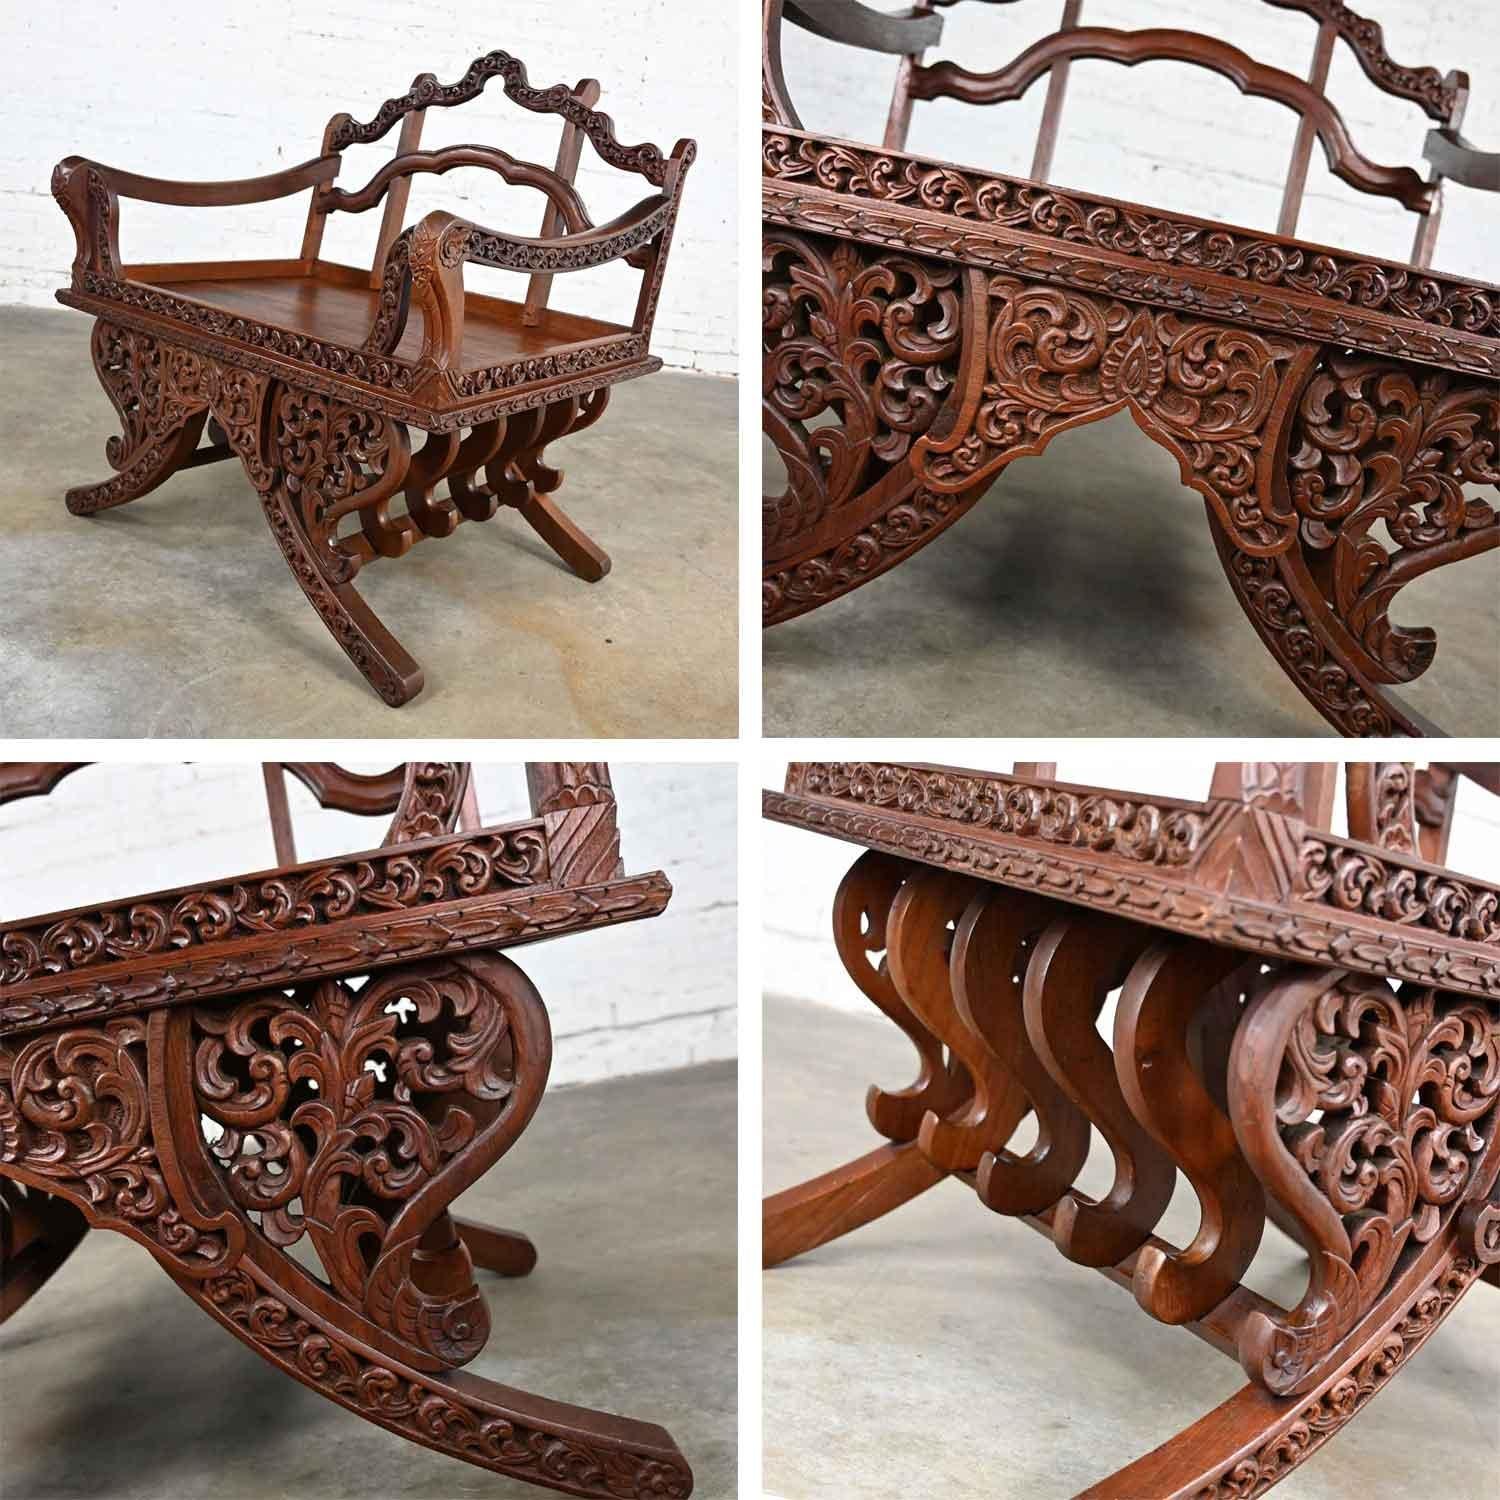 Chinoiserie Hand Carved Rosewood Howdah Elephant Saddle Chair Bangkok Thailand For Sale 5